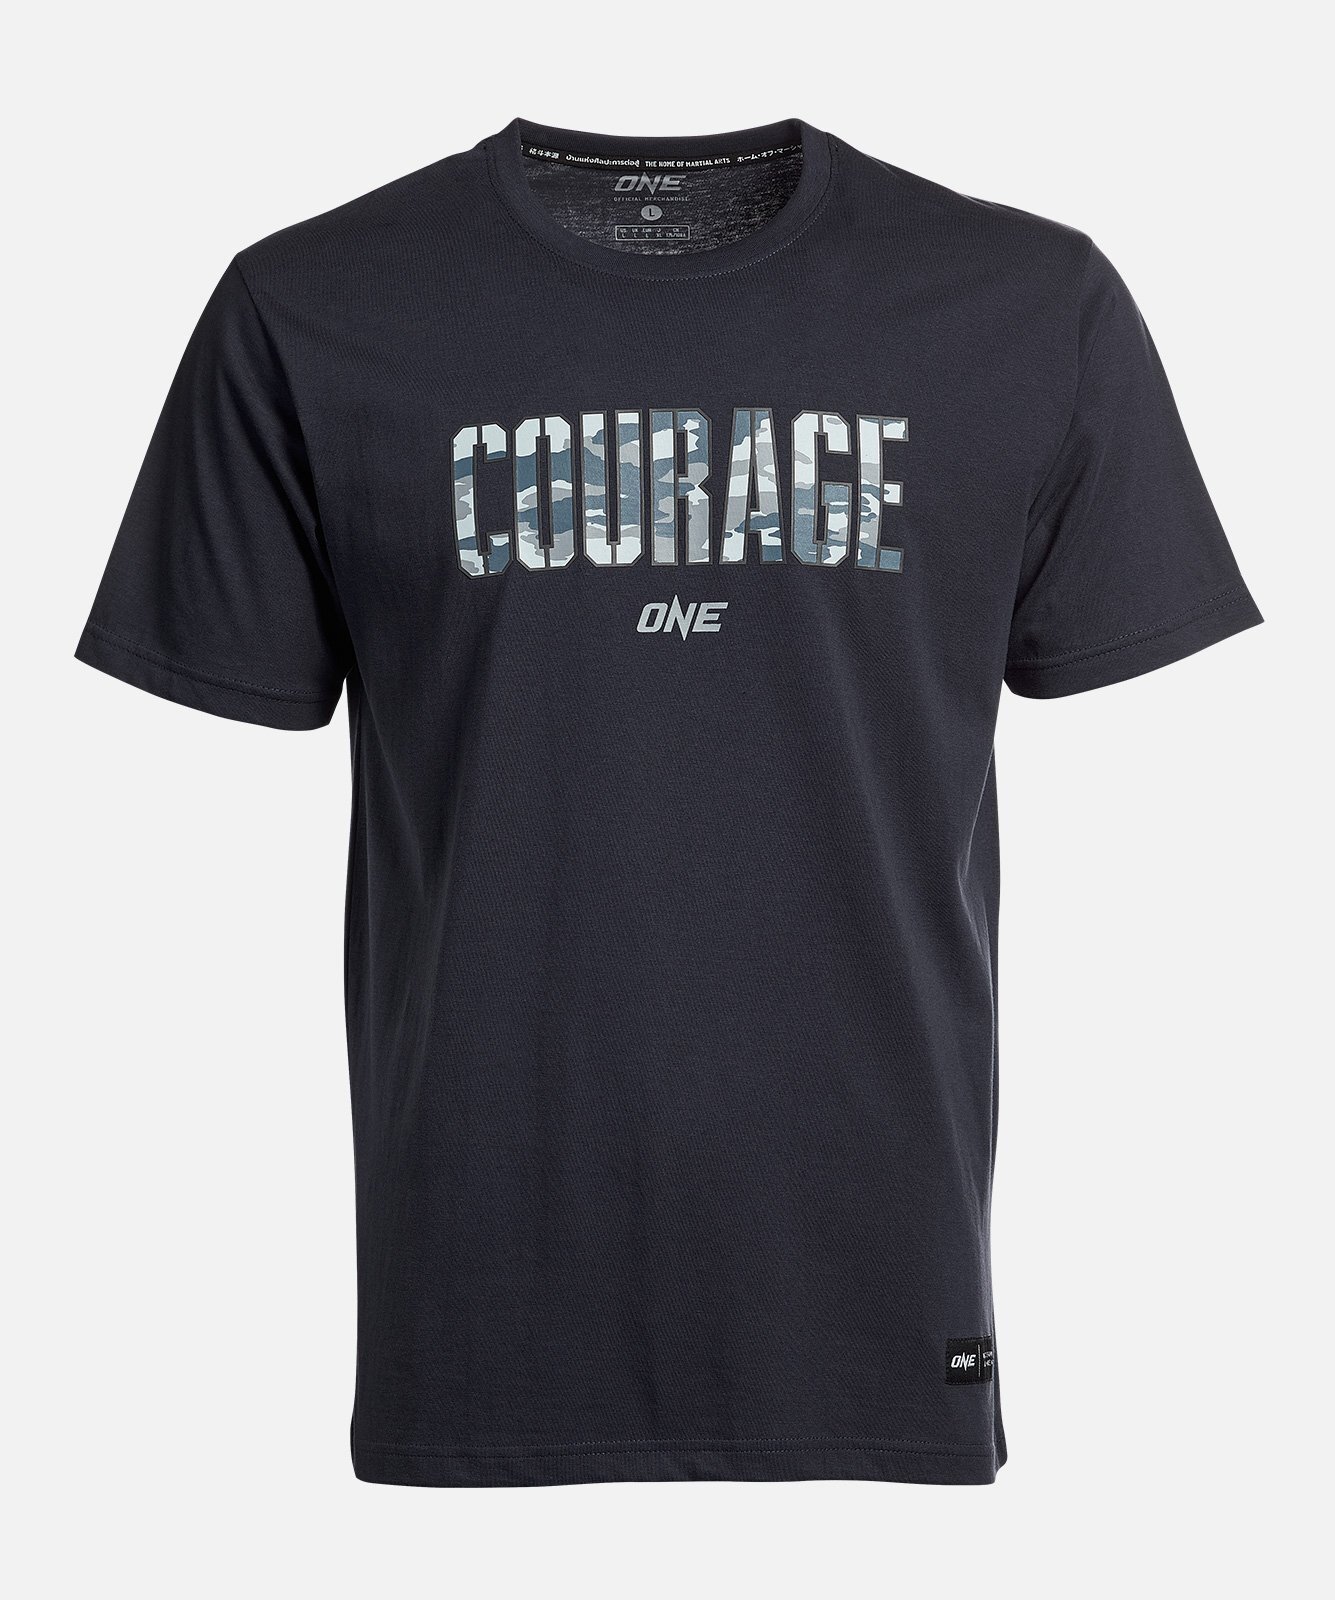 ONE "Courage" Tee - Extra Small